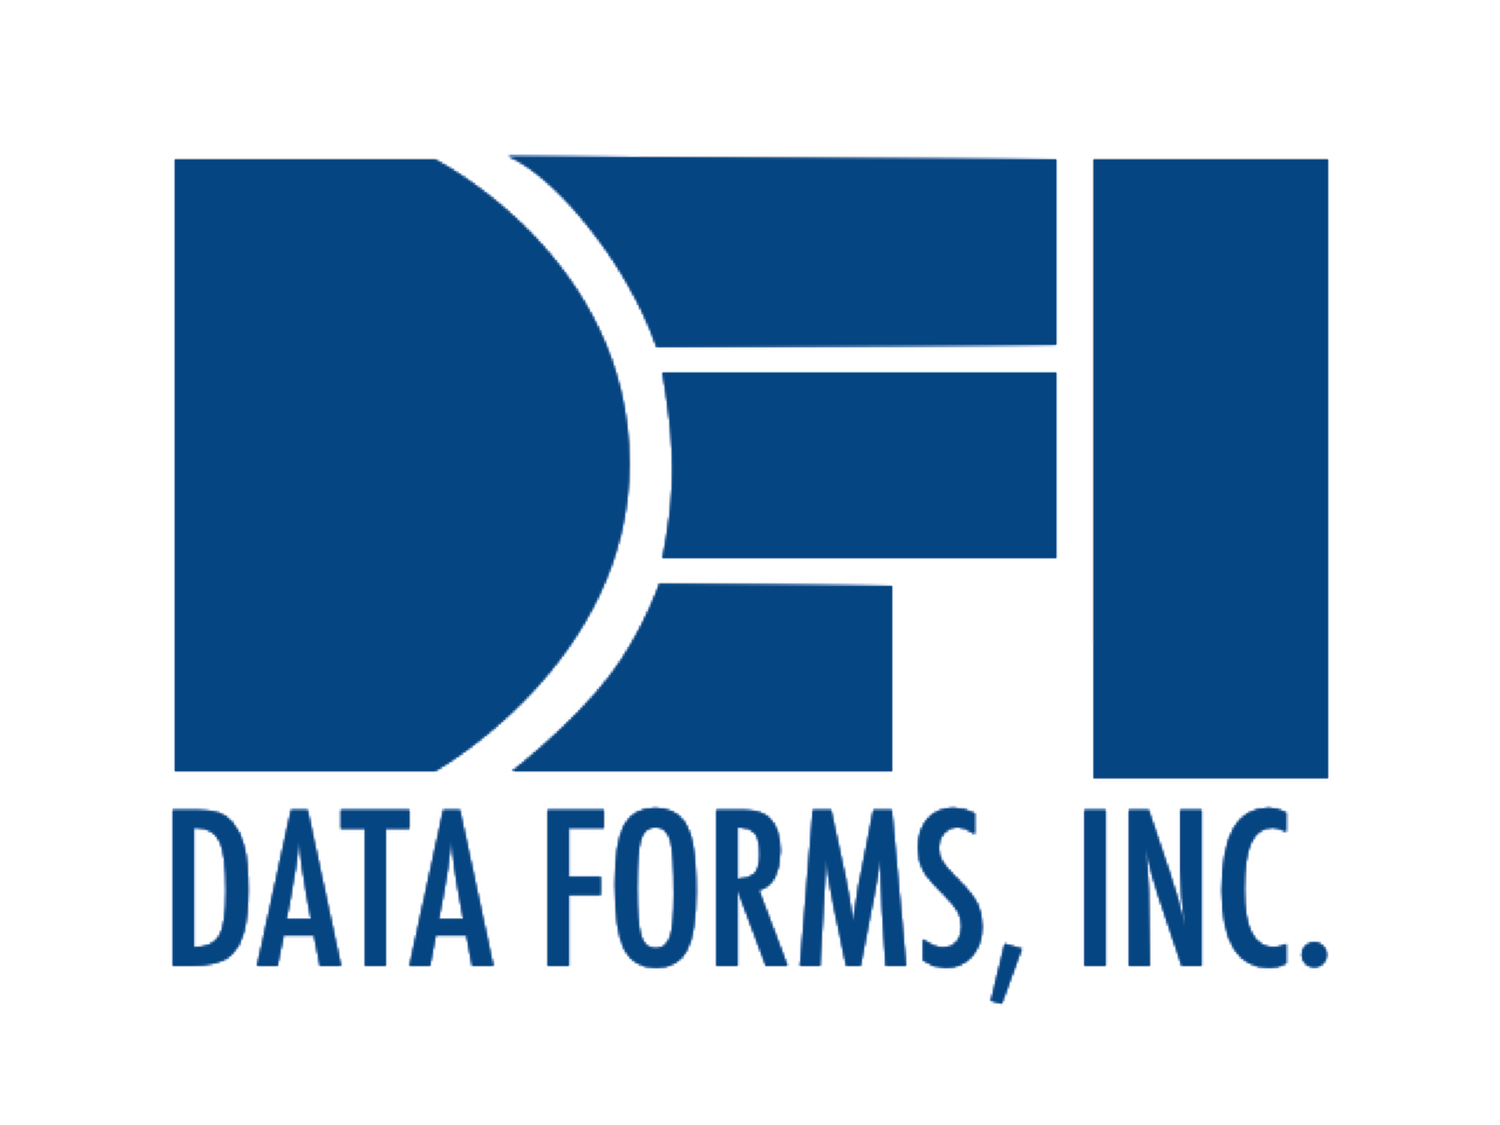 Data Forms, Inc.